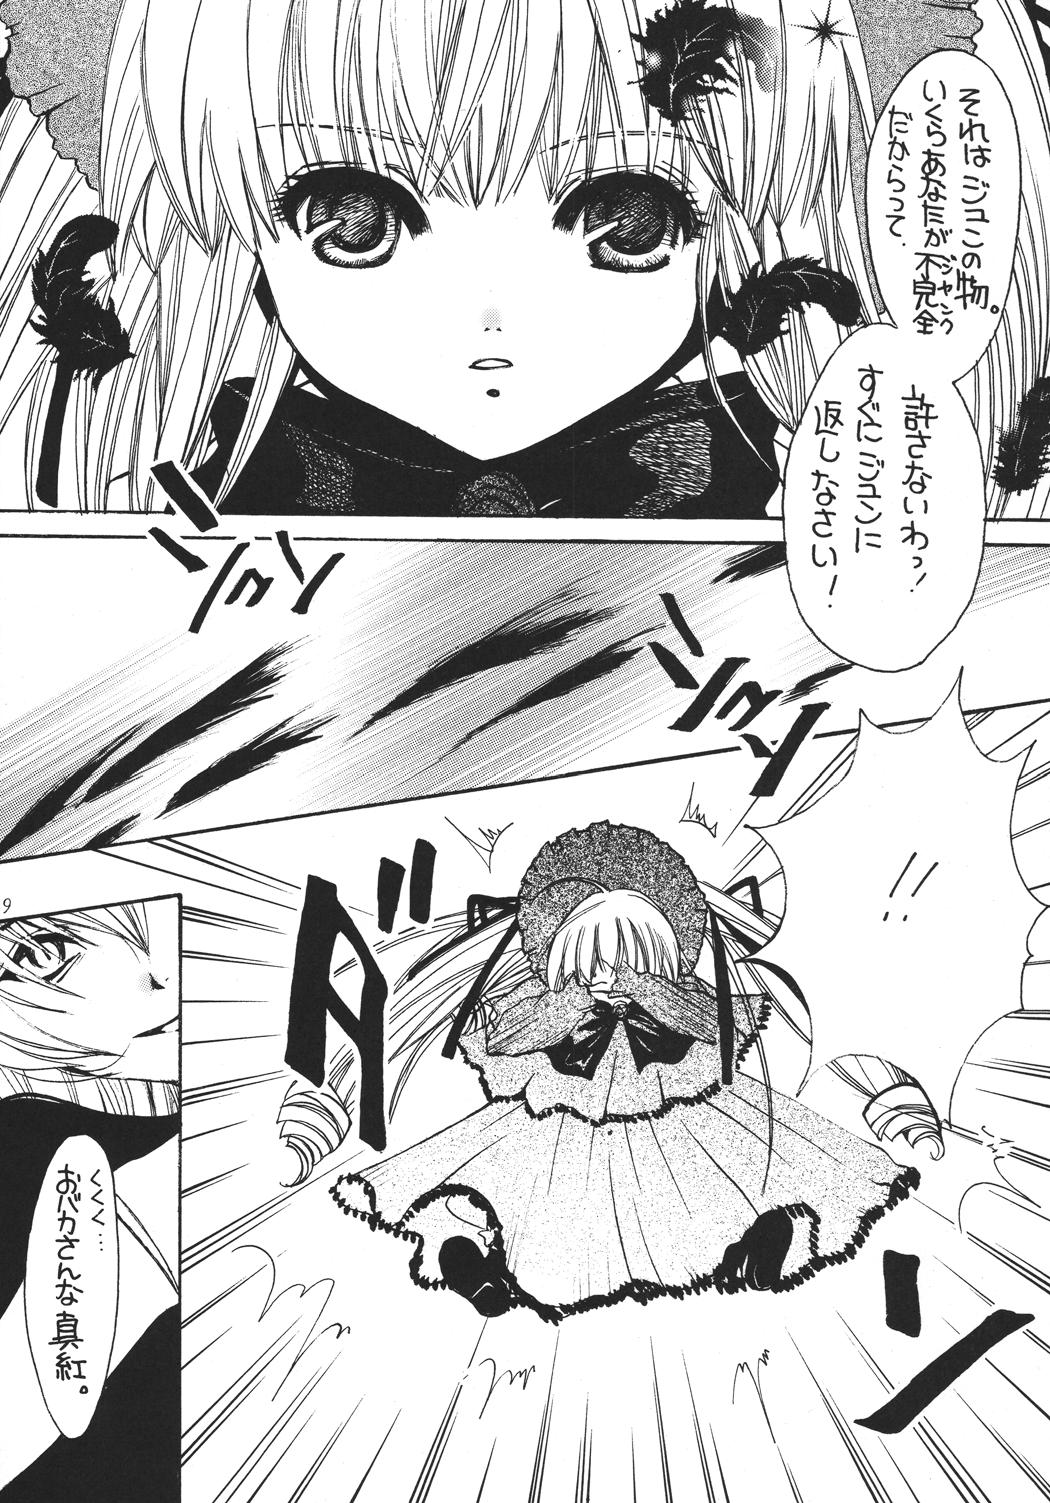 Massages Rosary of Roses 2 - Rozen maiden Sex - Page 9